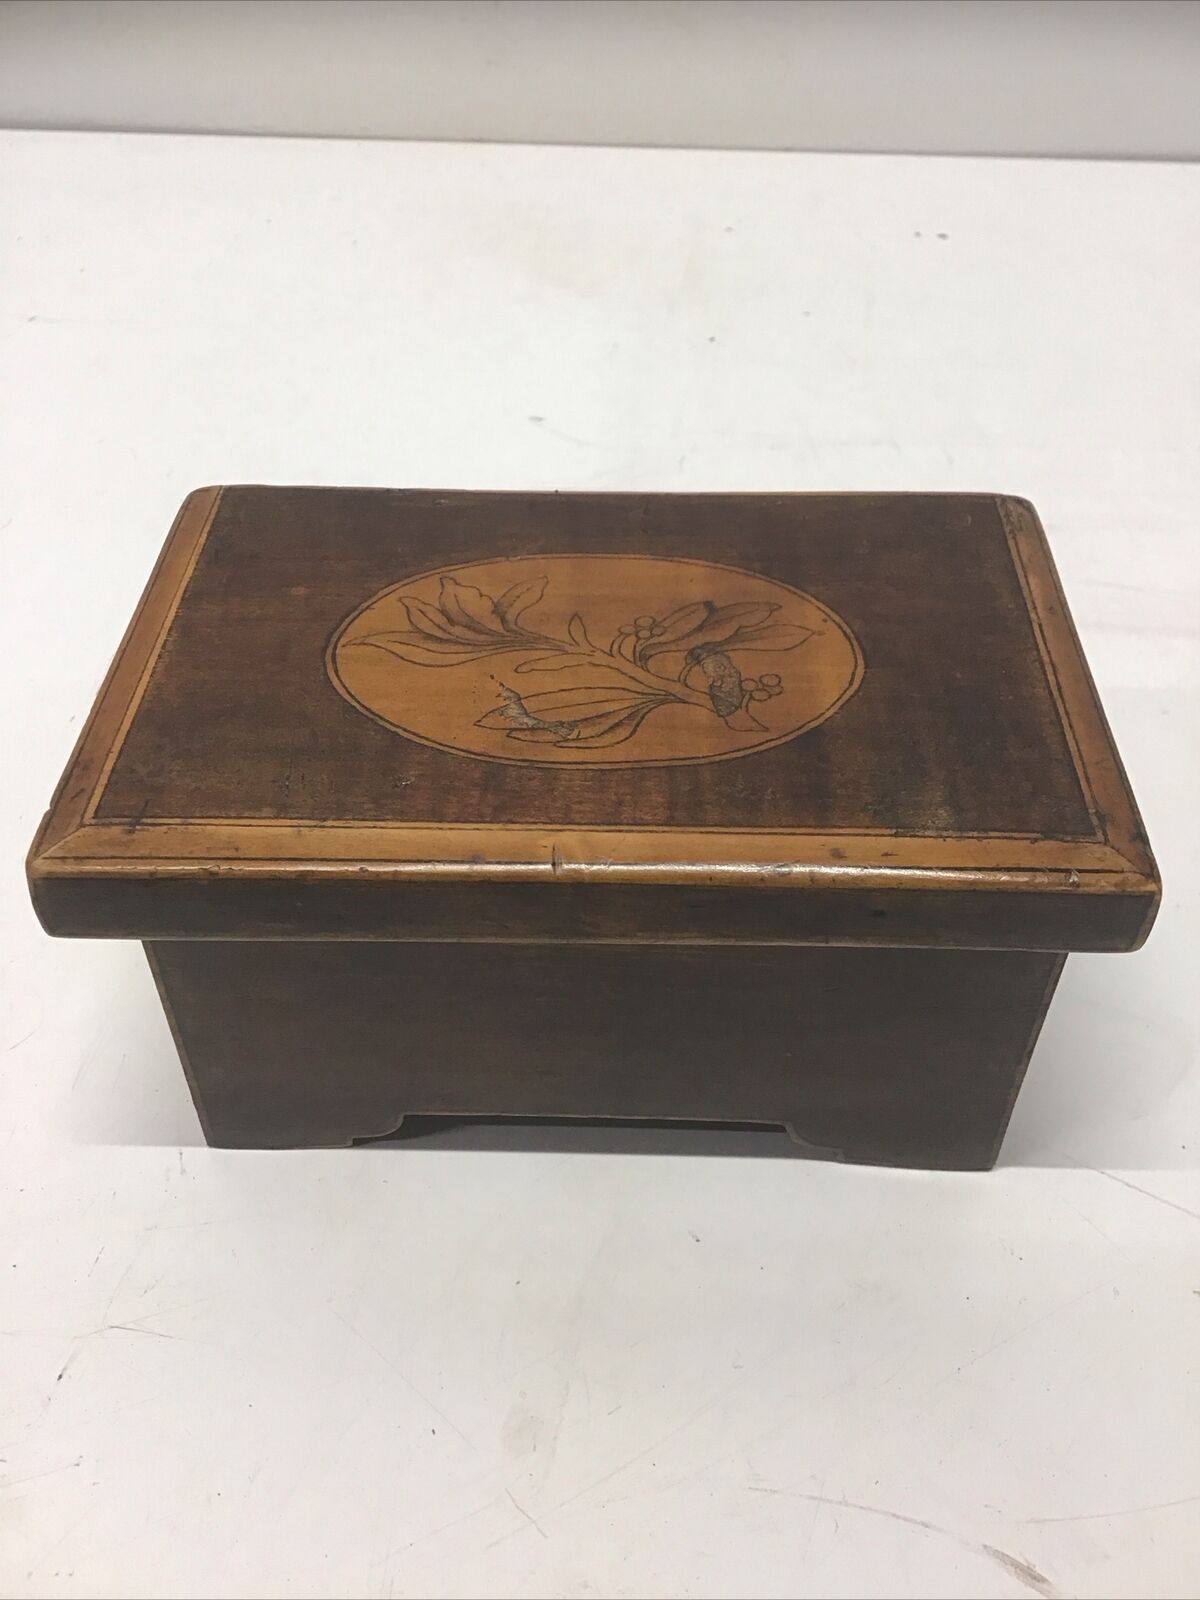 Small Antique 1800’s American Inlay Cherrywood Hinged Box 5” x 3” x 2.75” Cute